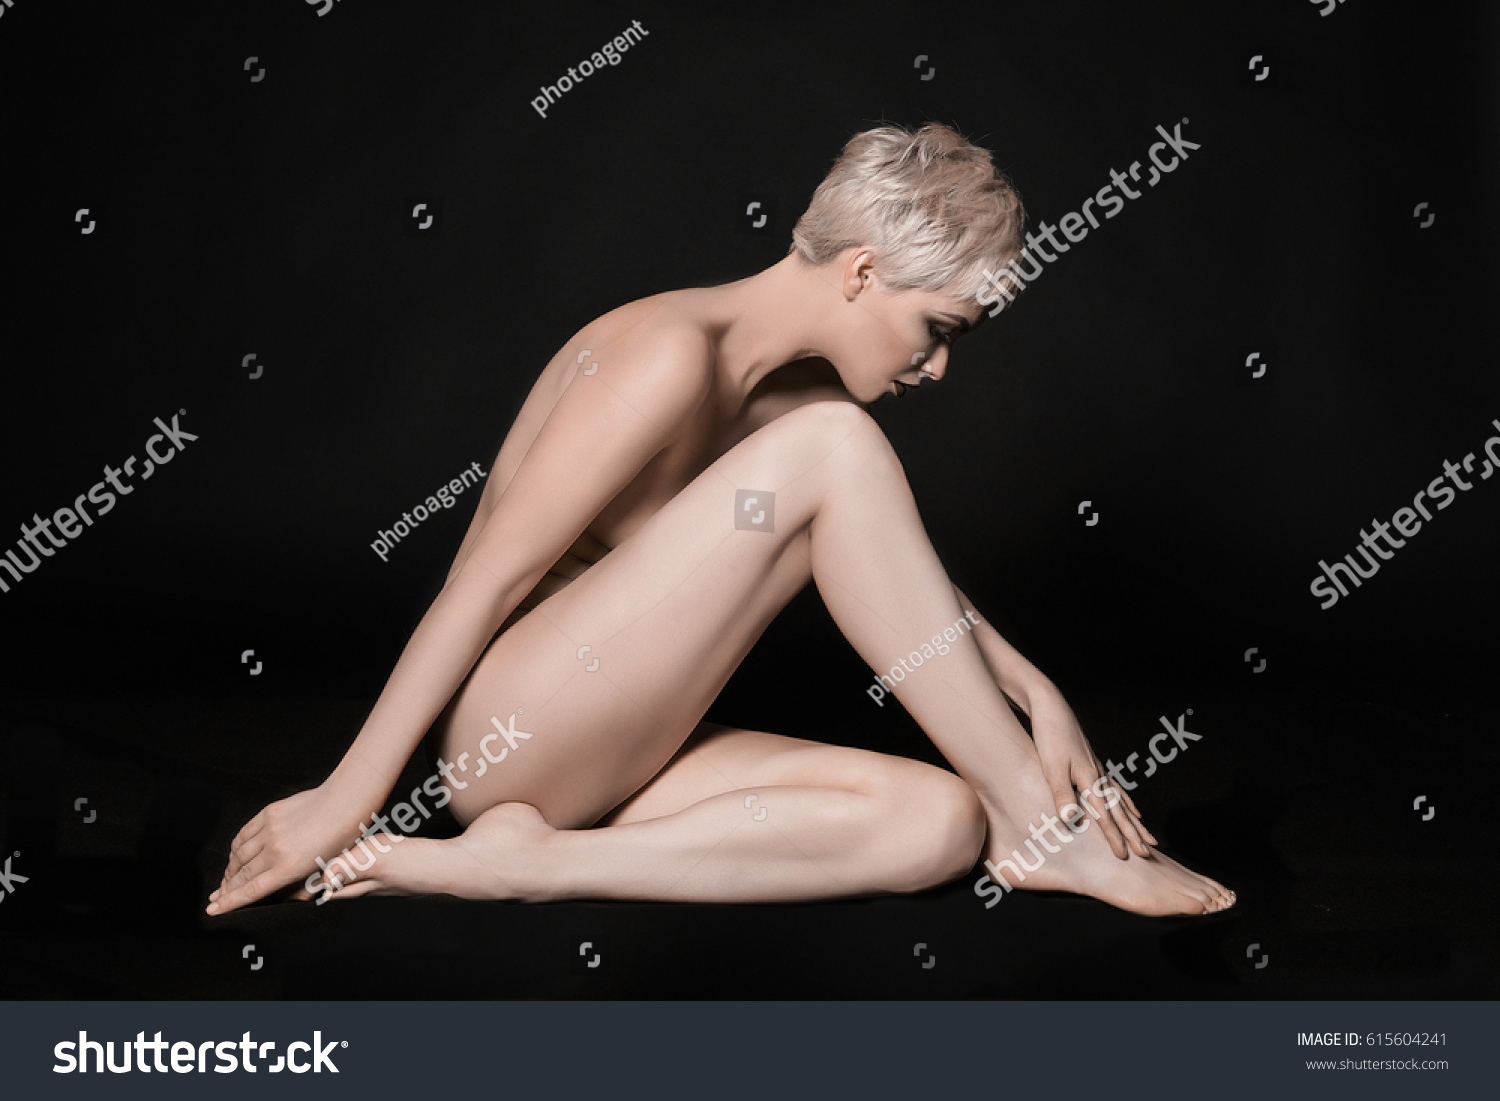 Nude Women With Hair 12